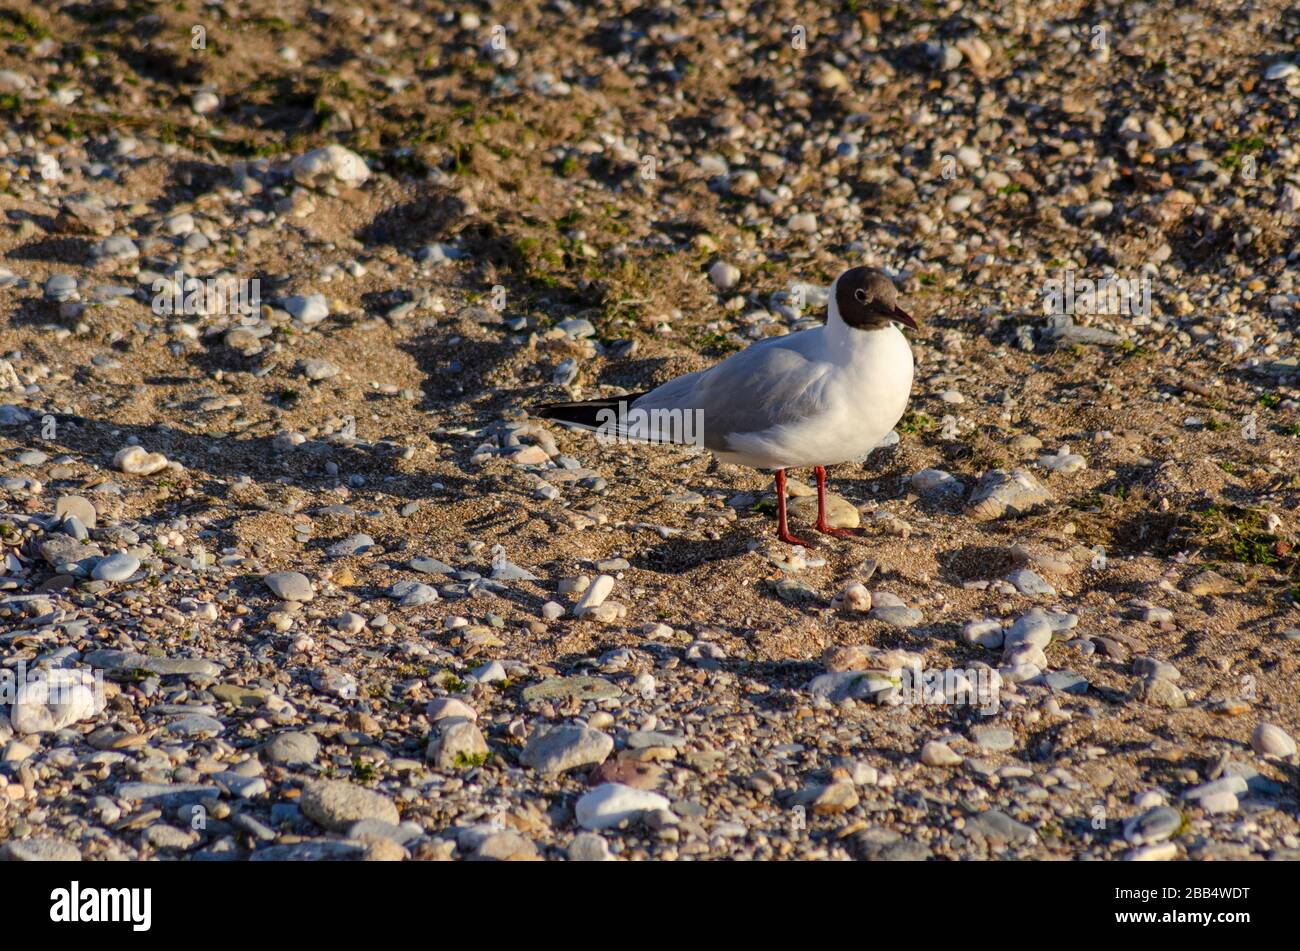 A Mediterranean gull ( Larus melanocephalus ) on a beach in Alexandroupoli Greece. The gulls are just beginning to loose their winter plumage as sprin Stock Photo